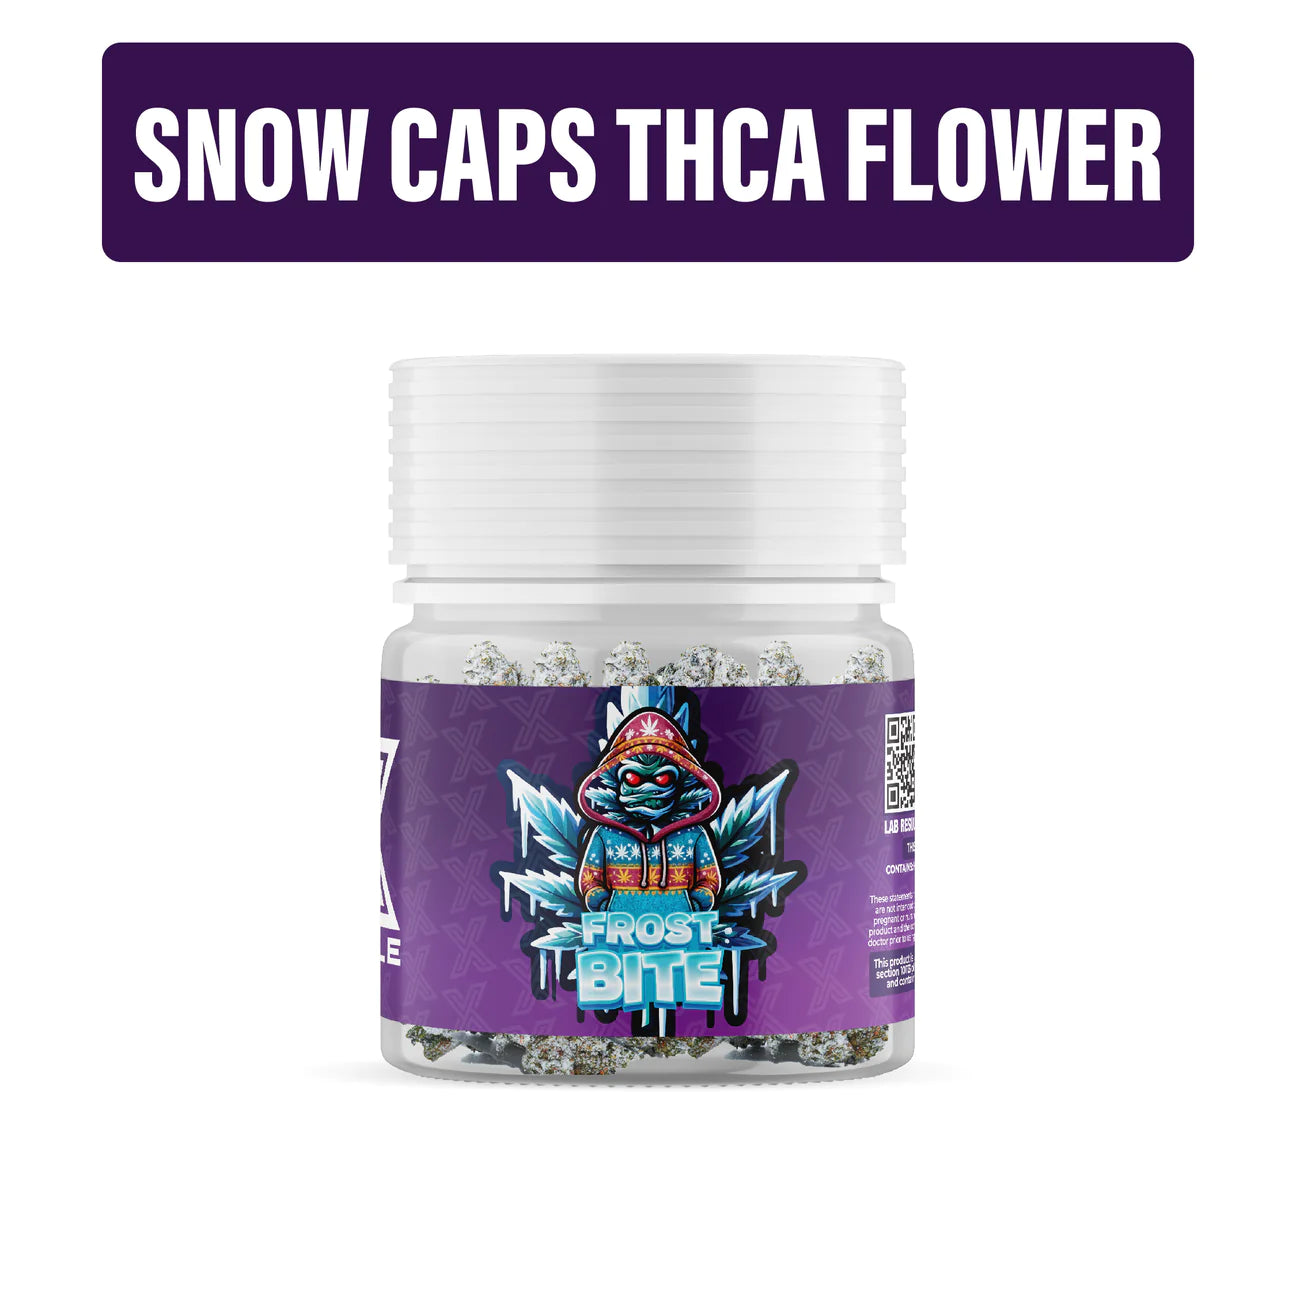 does thca stay in your system?